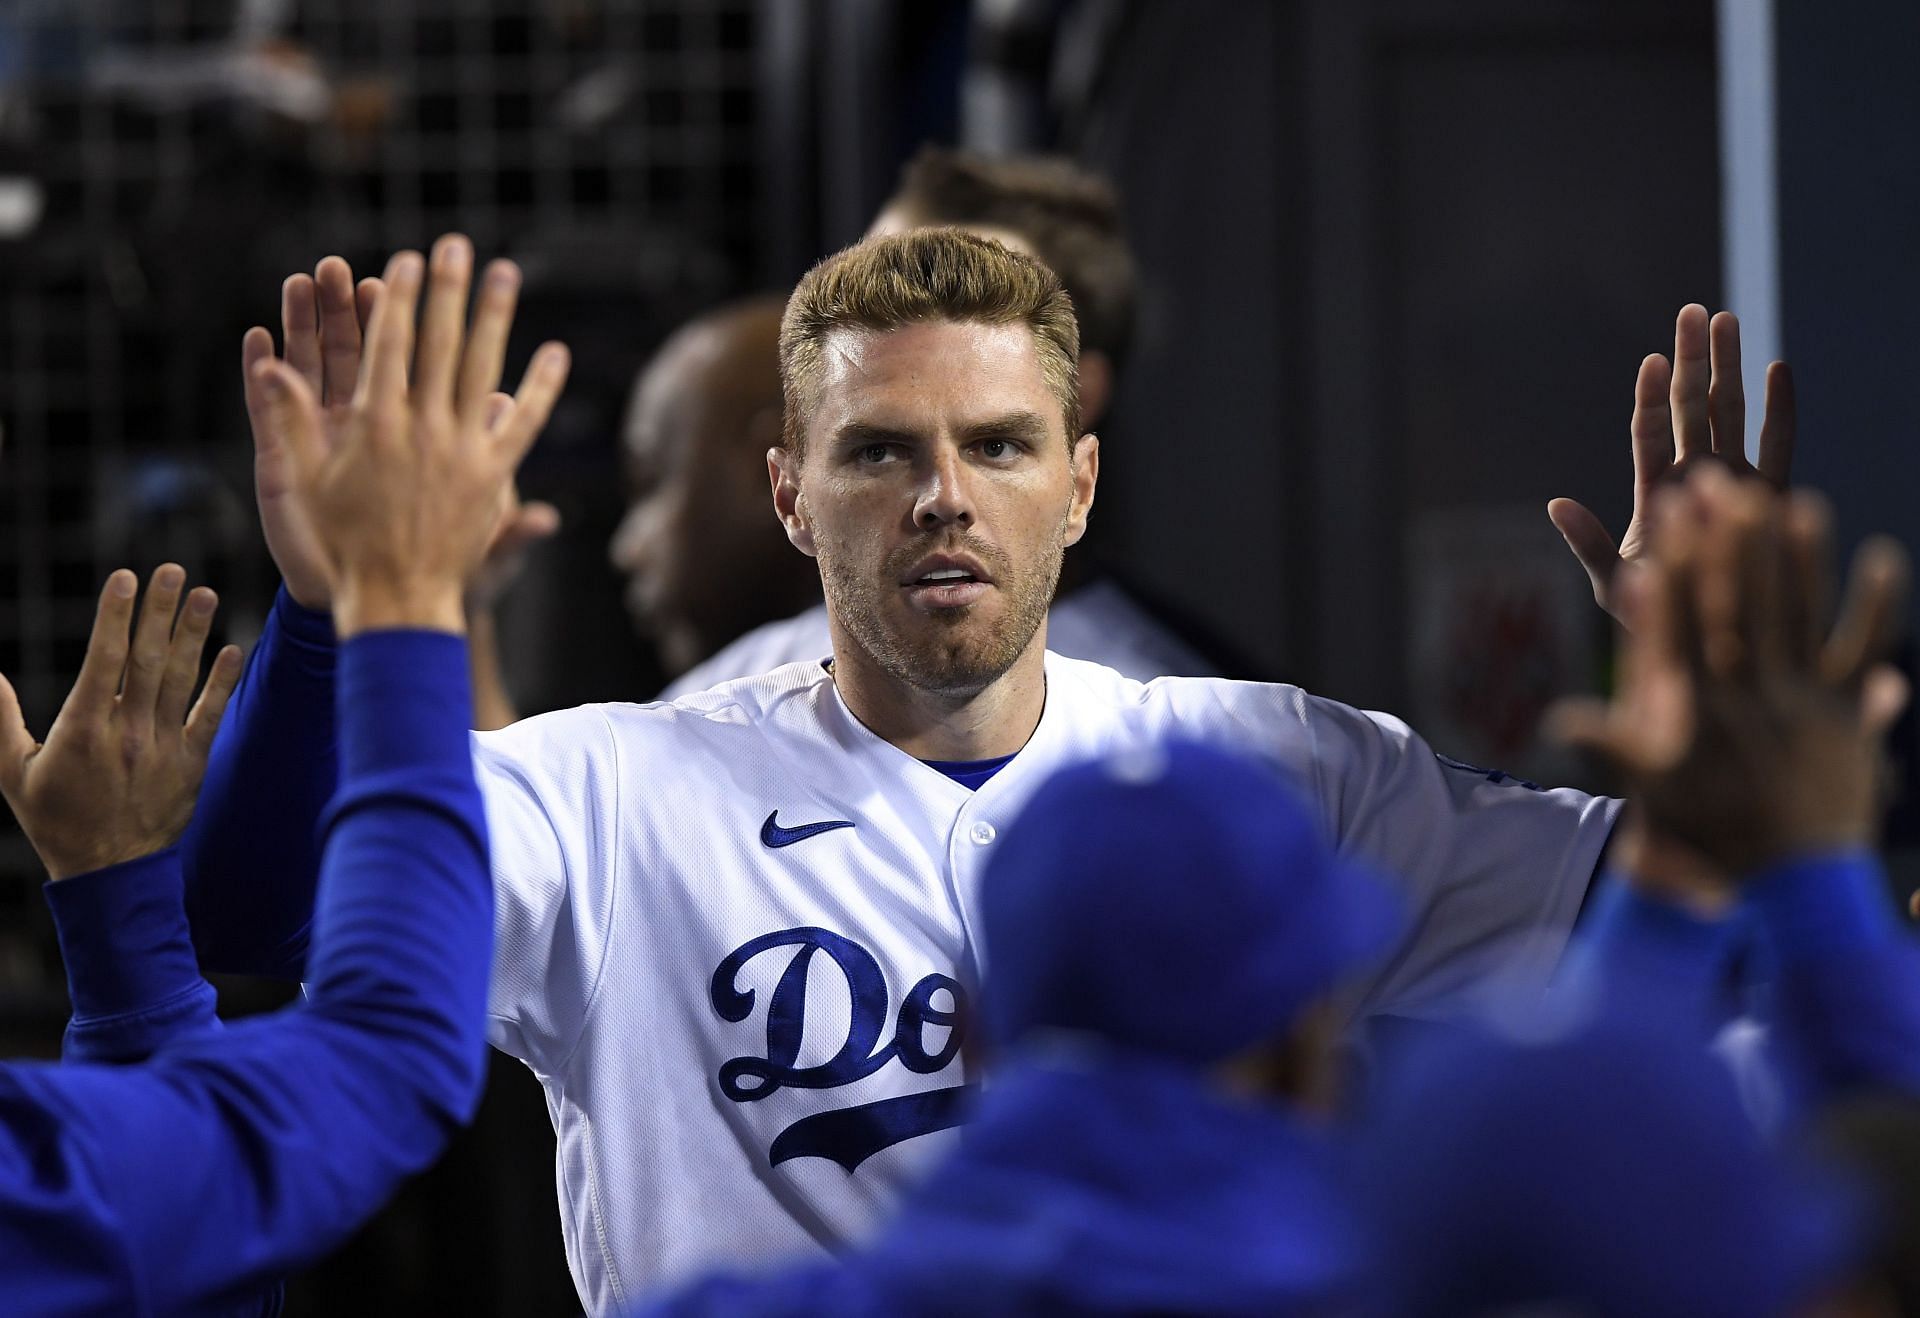 The man of the hour for the Dodgers, Freddie Freeman